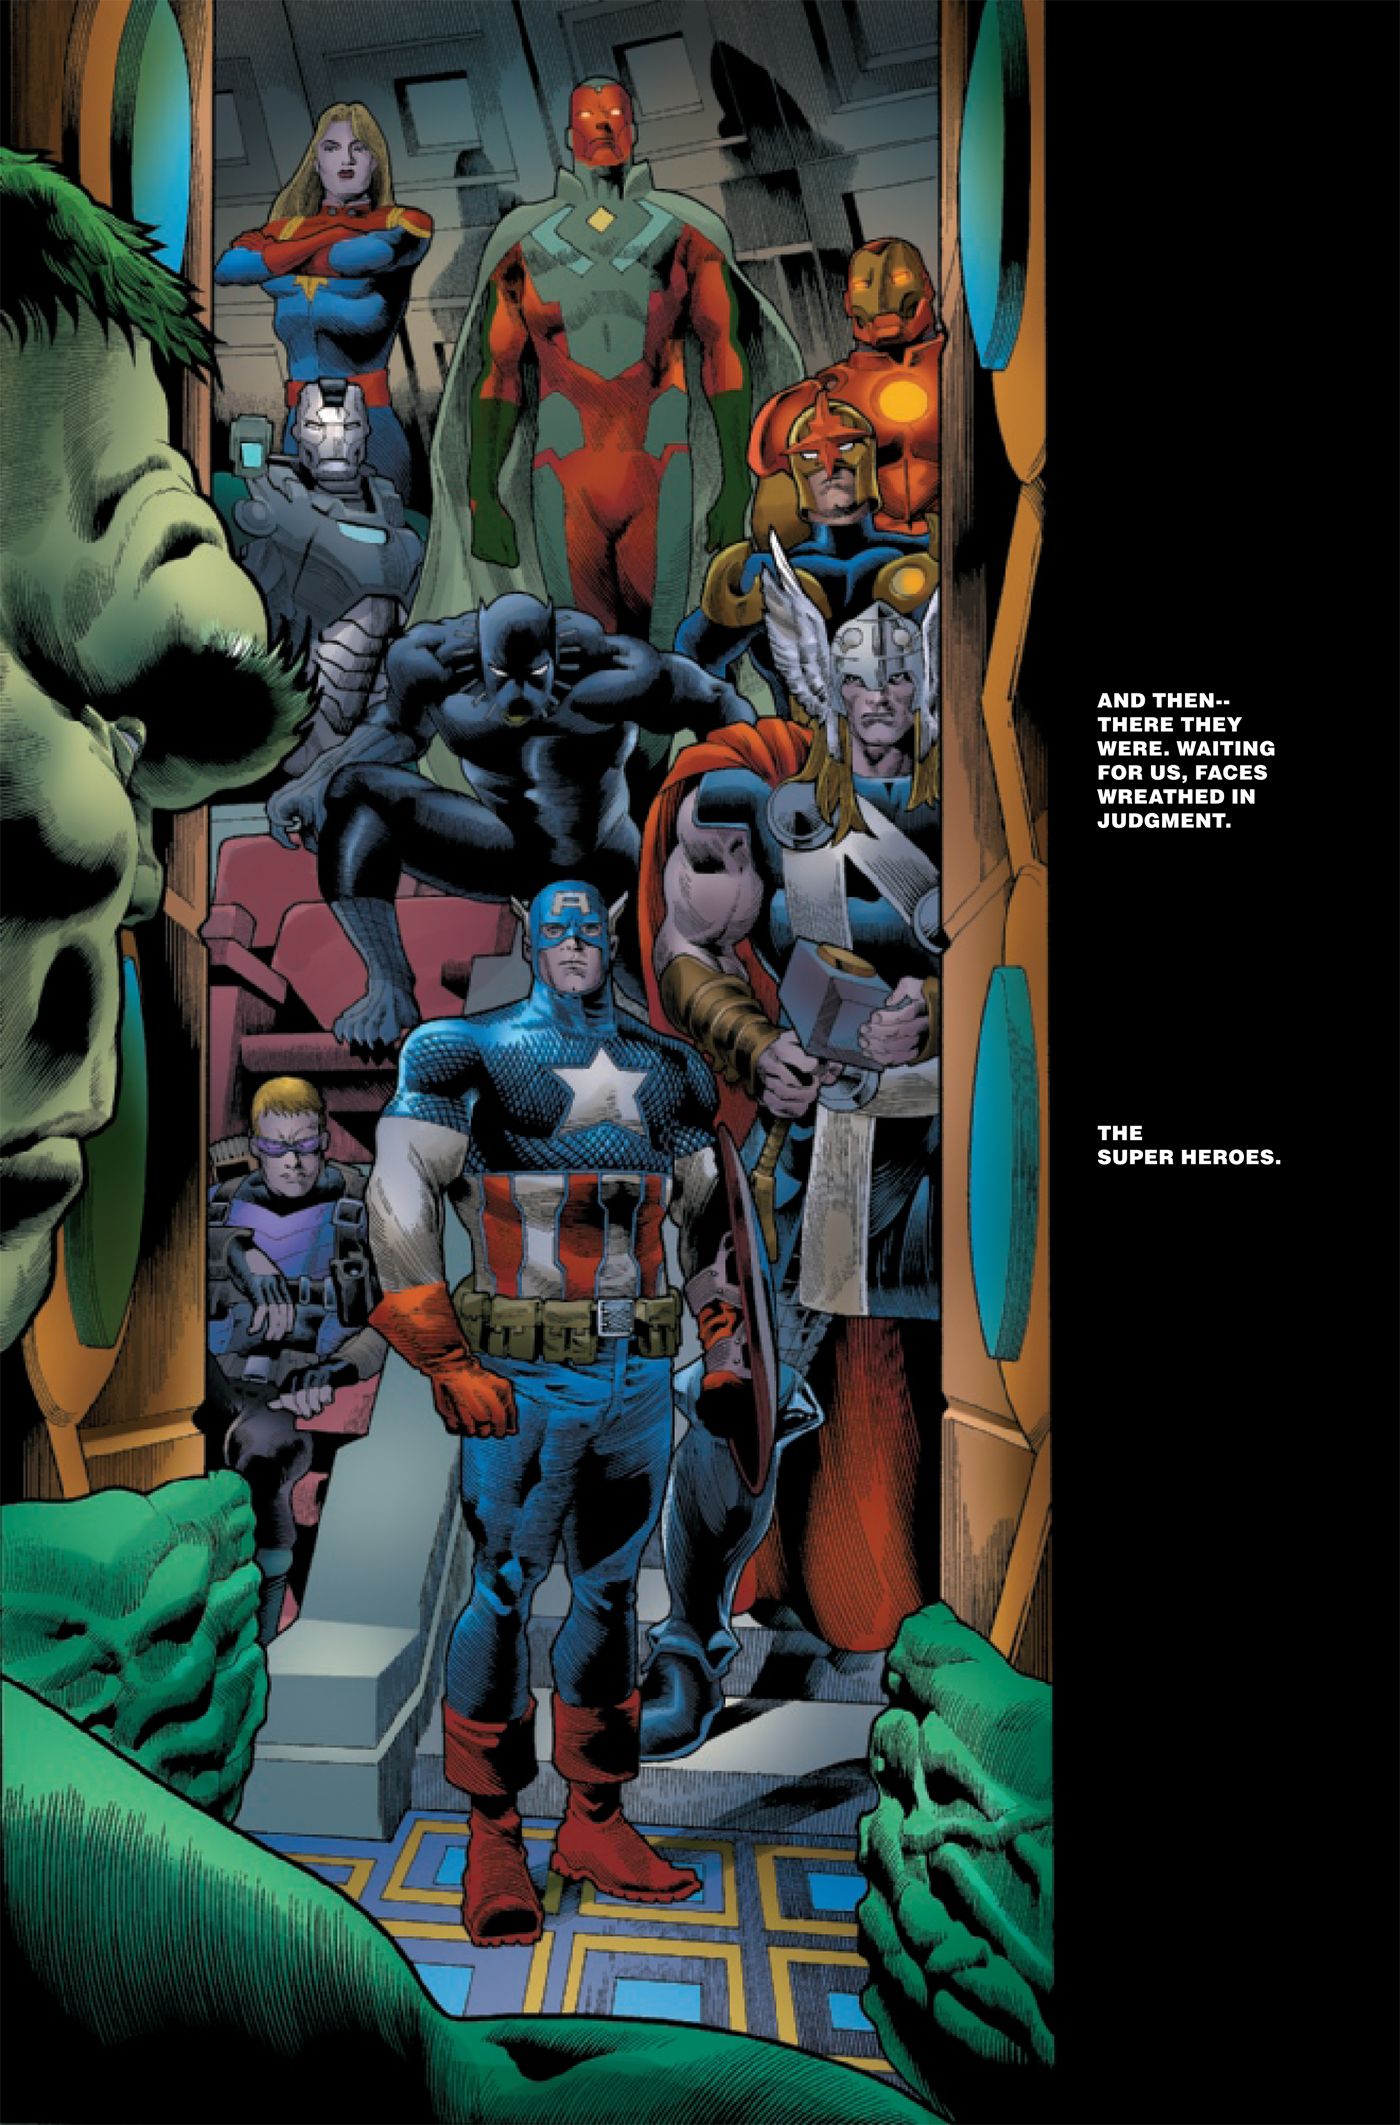 Hulk opens the door to see the Avengers waiting for him on the other side.